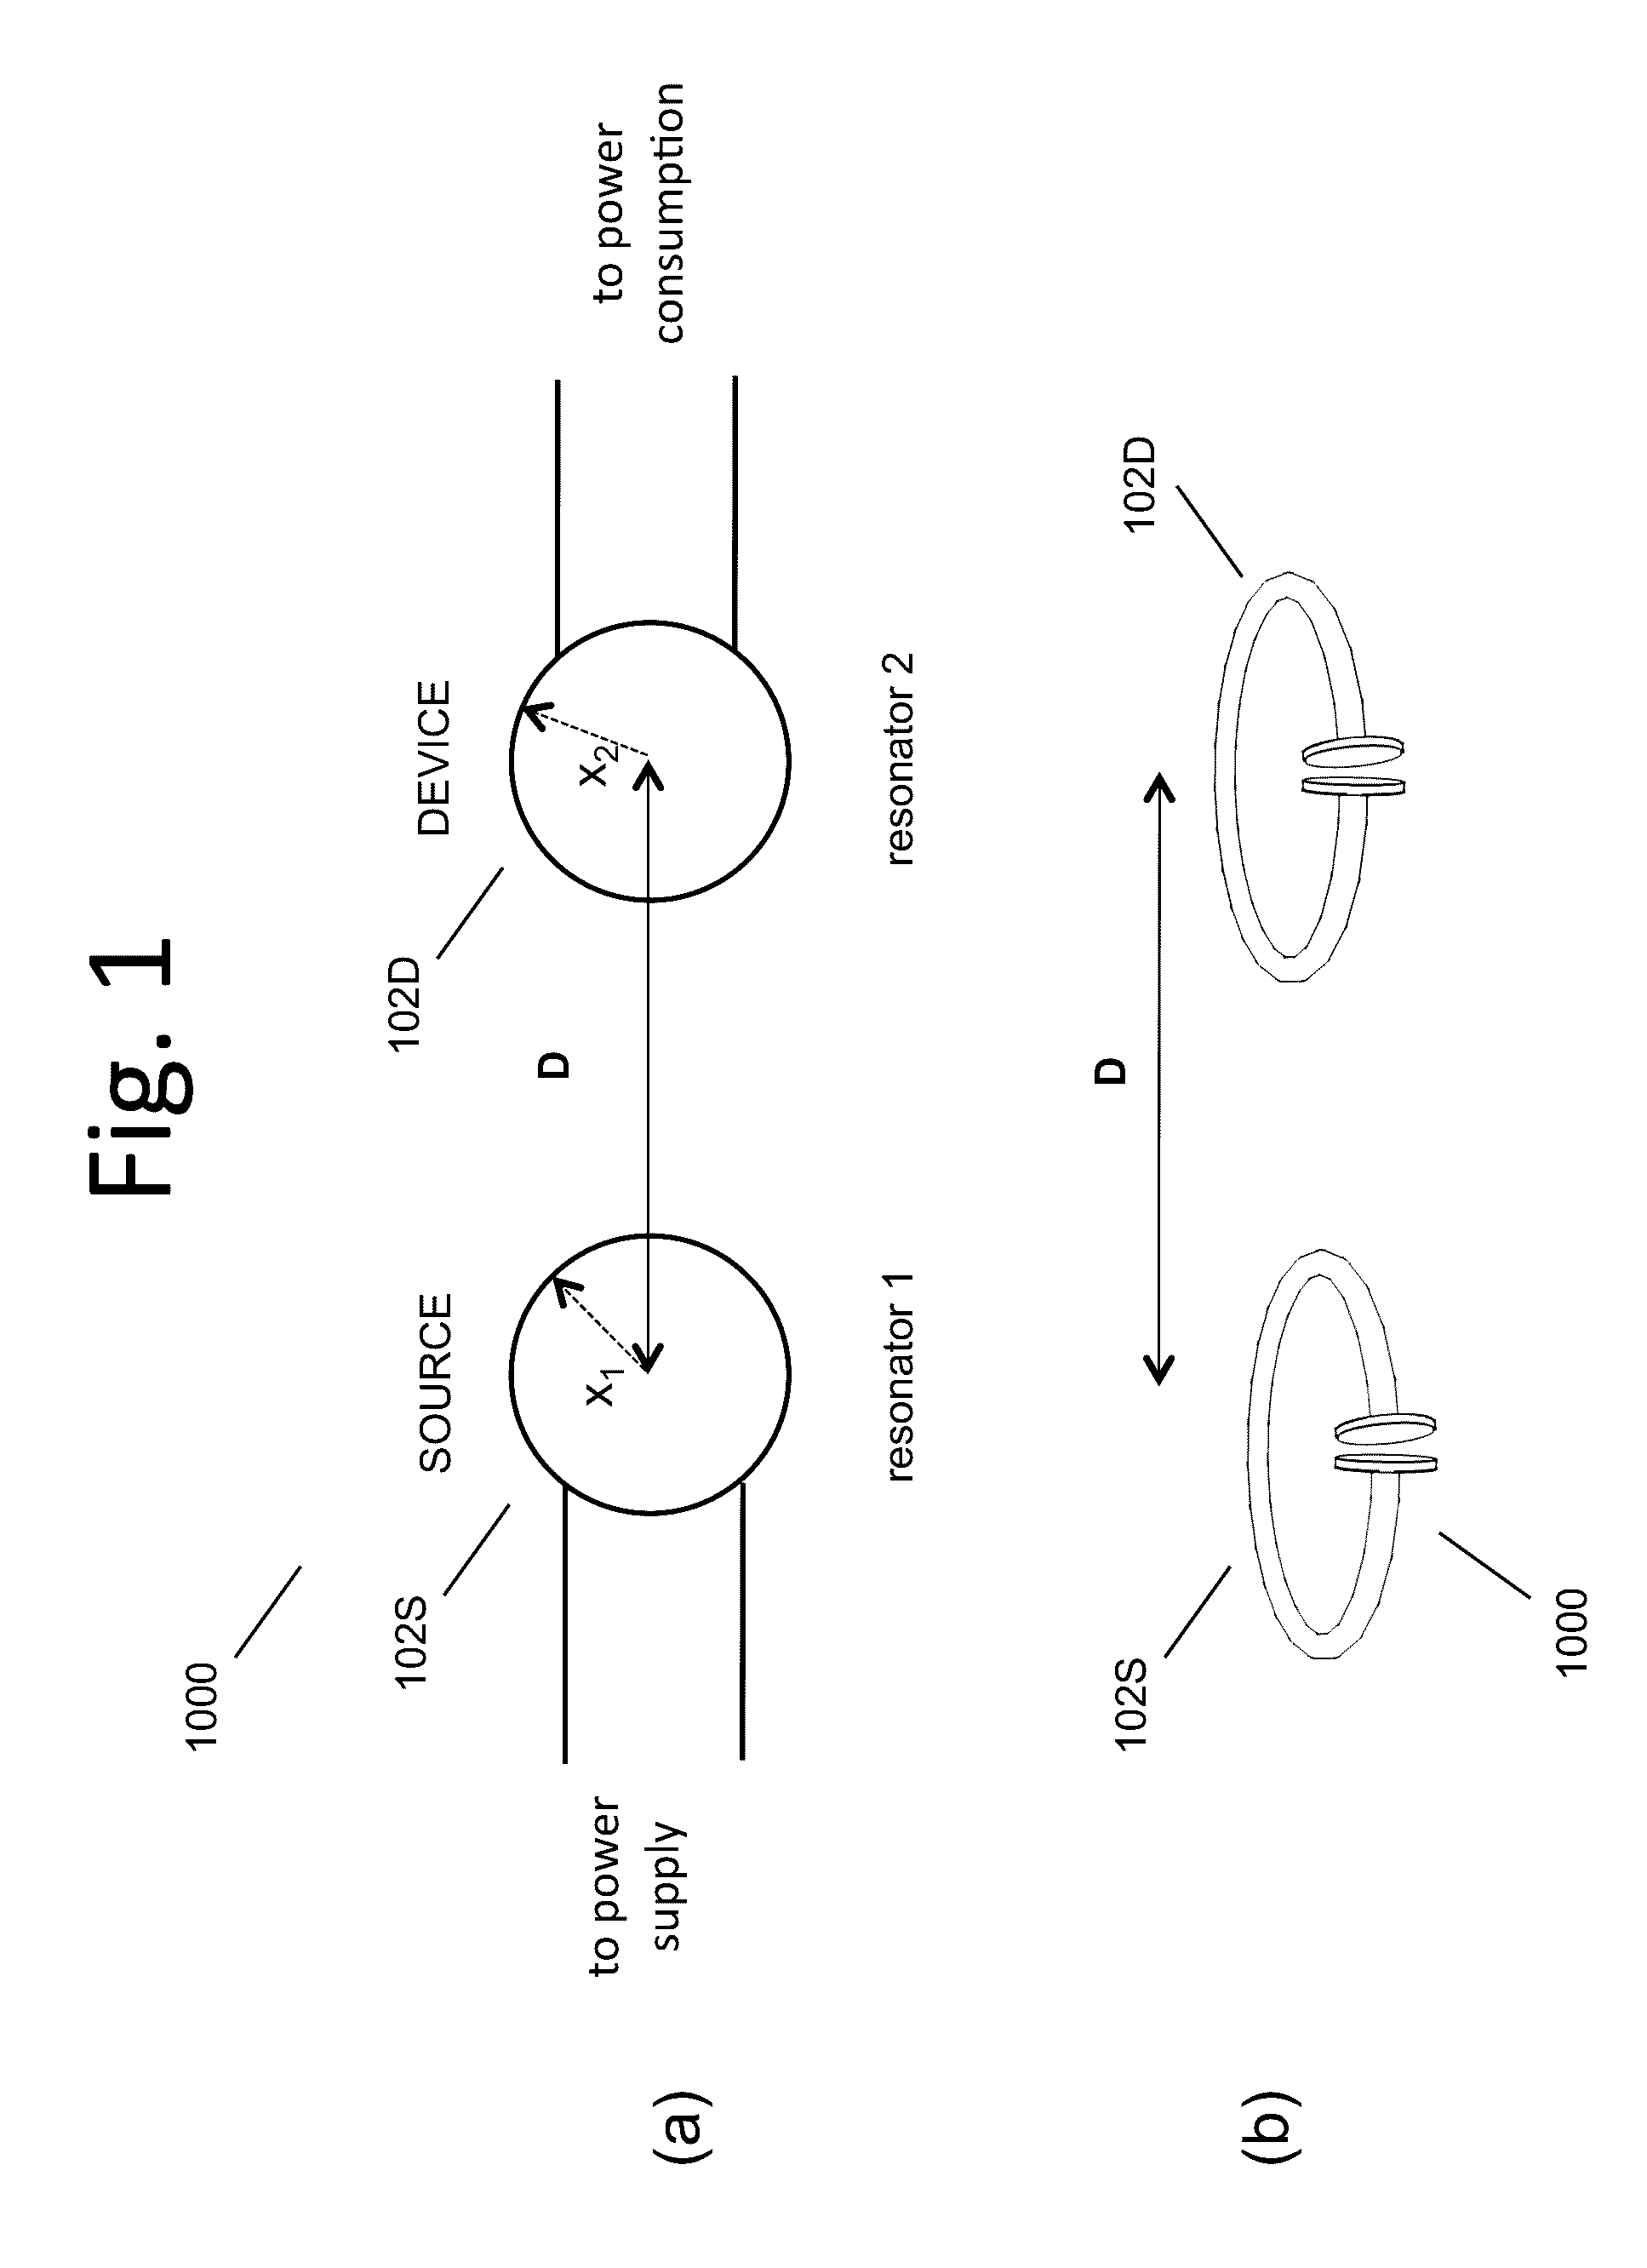 Wireless energy transfer using variable size resonators and system monitoring